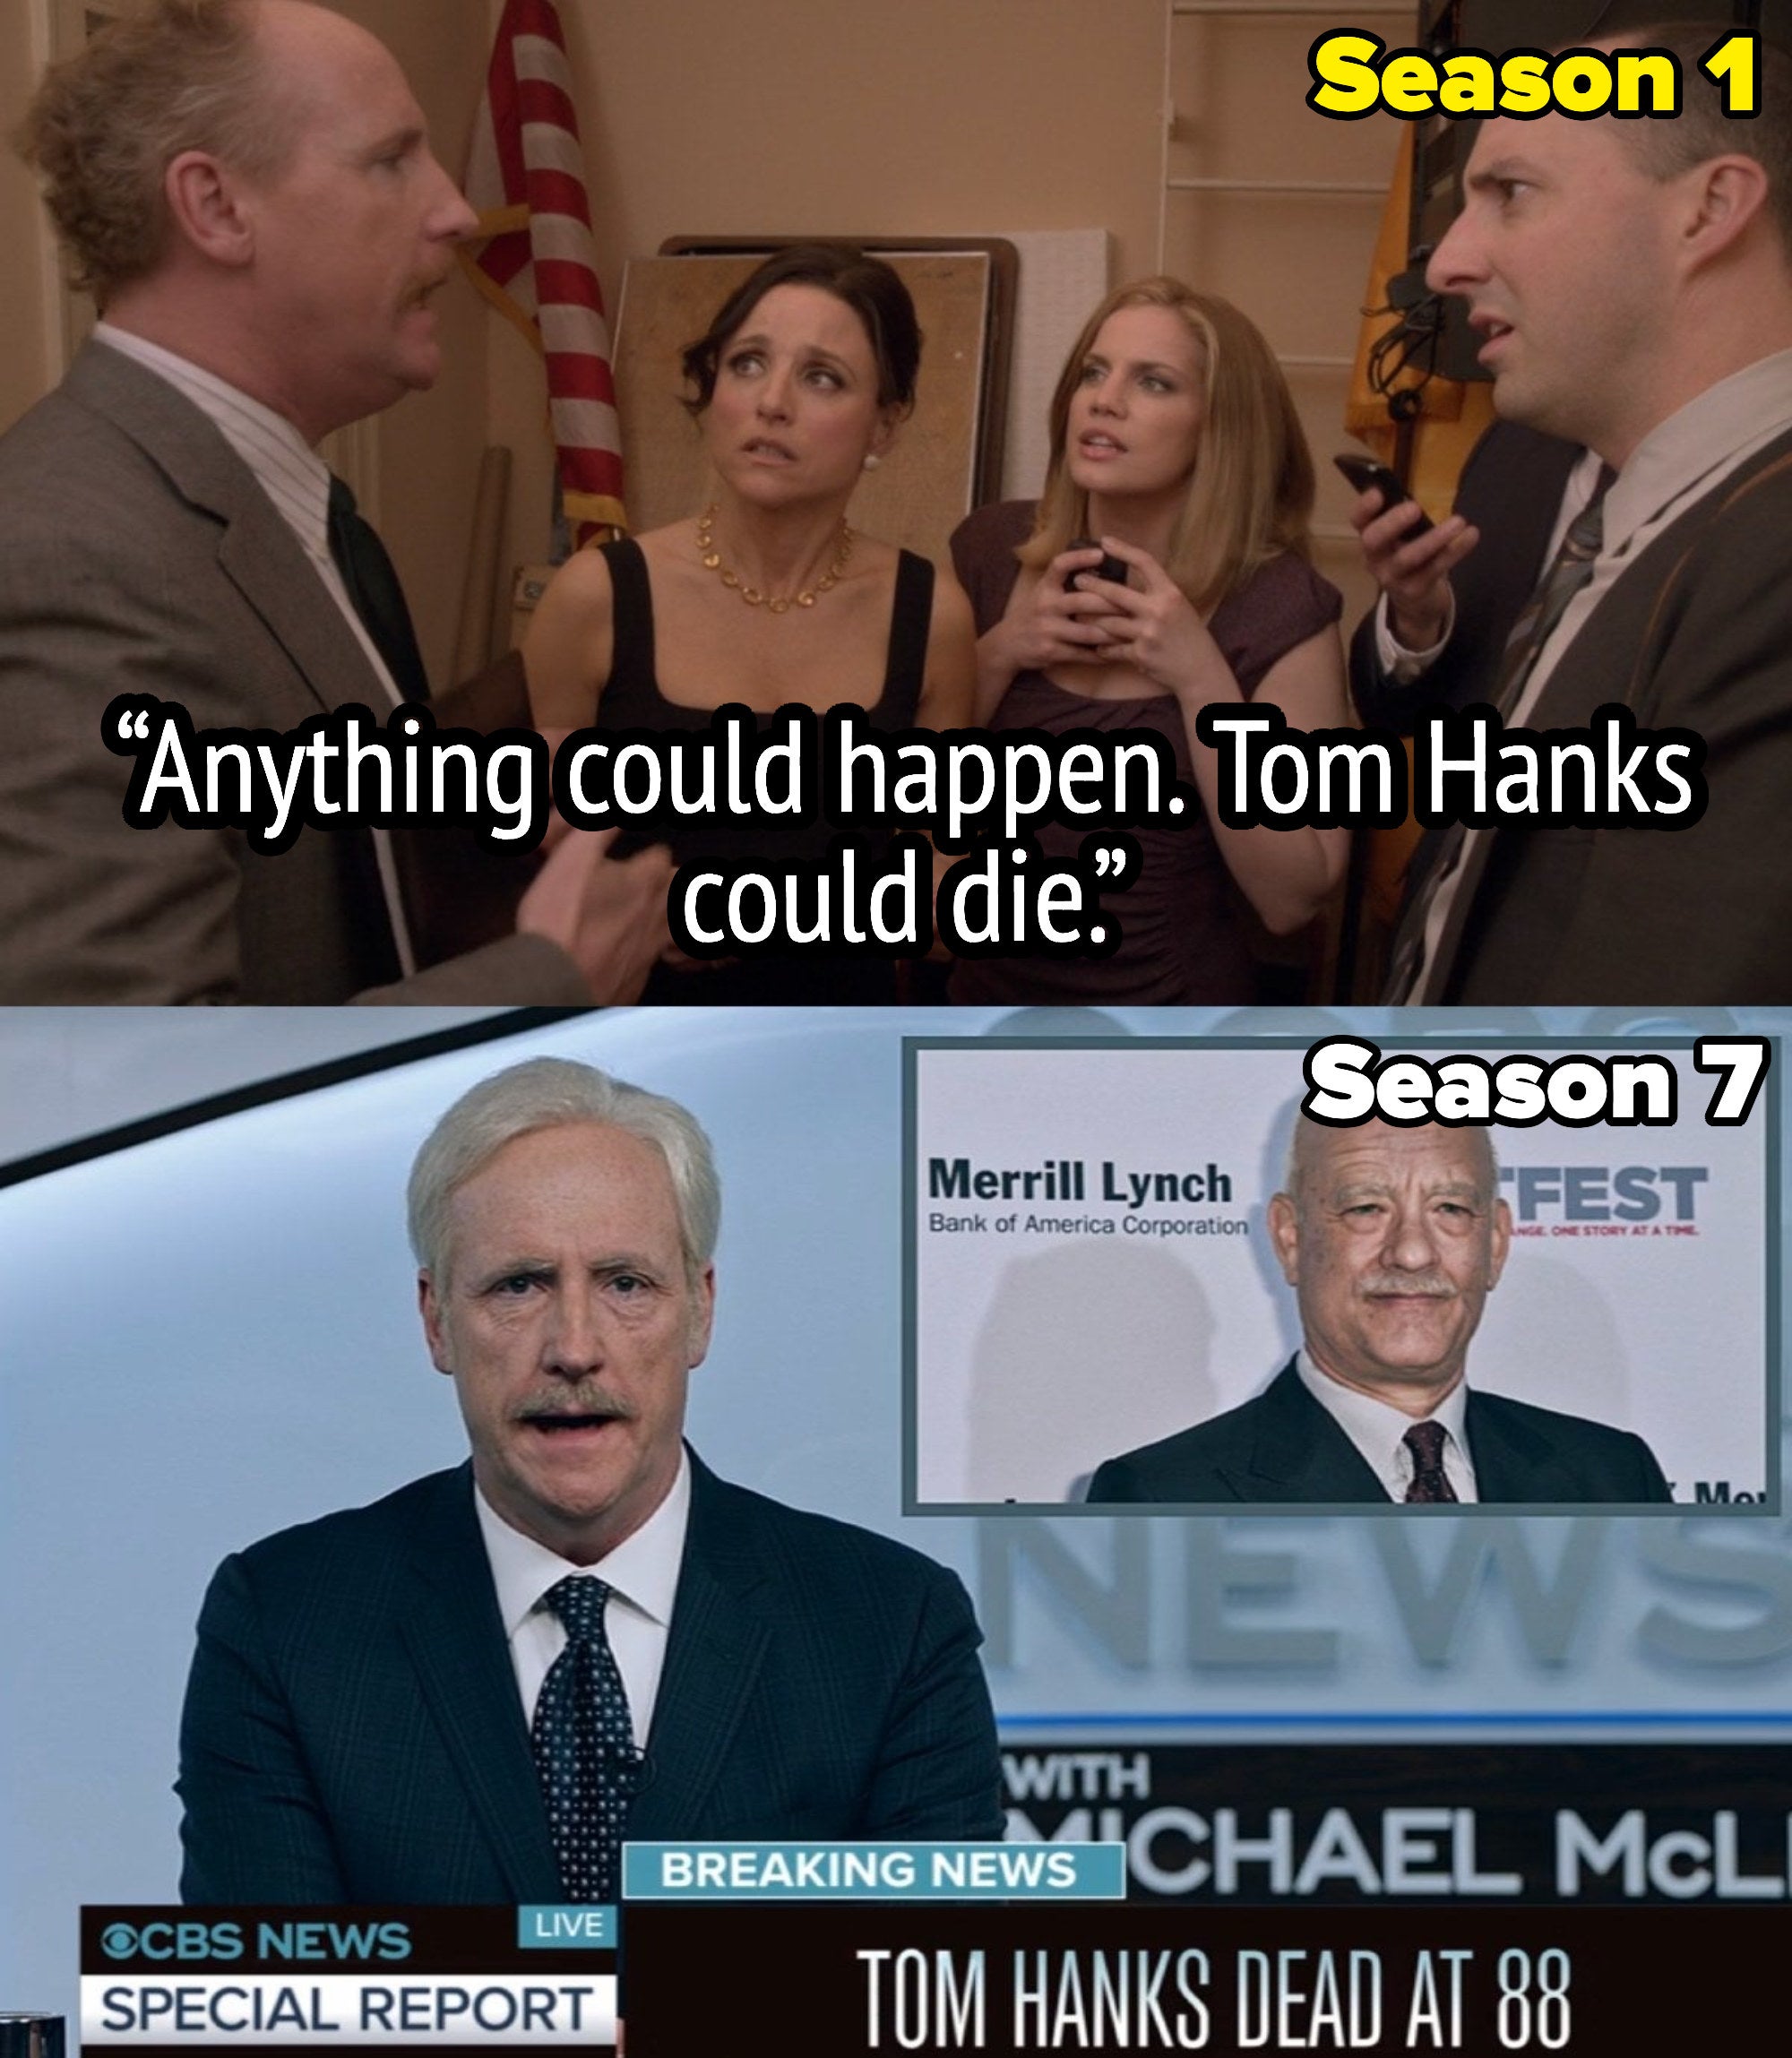 mike from veep saying anything could happen tom hanks could die in the series premiere and then a news report chyron saying tom hanks dead at 88 in the series finale